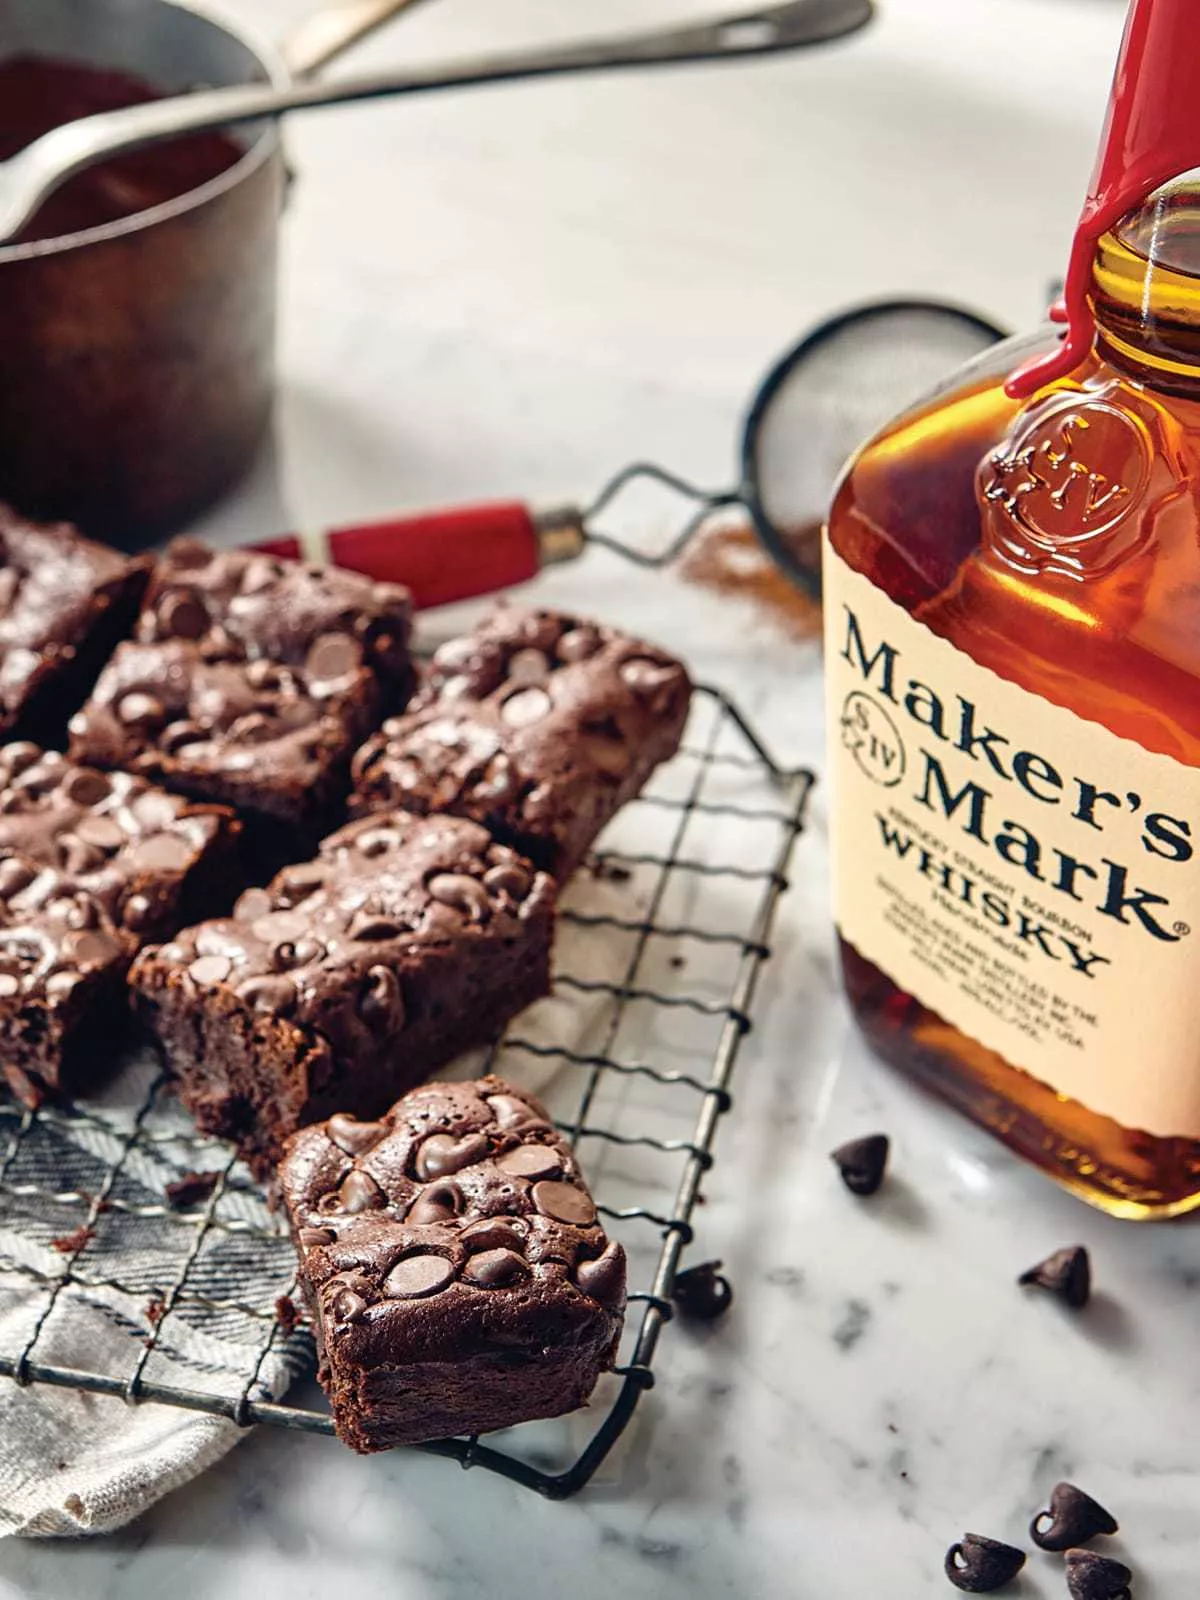 Brownies rest on a cooling rack cut into squares next to a bottle of Classic Maker's Mark.